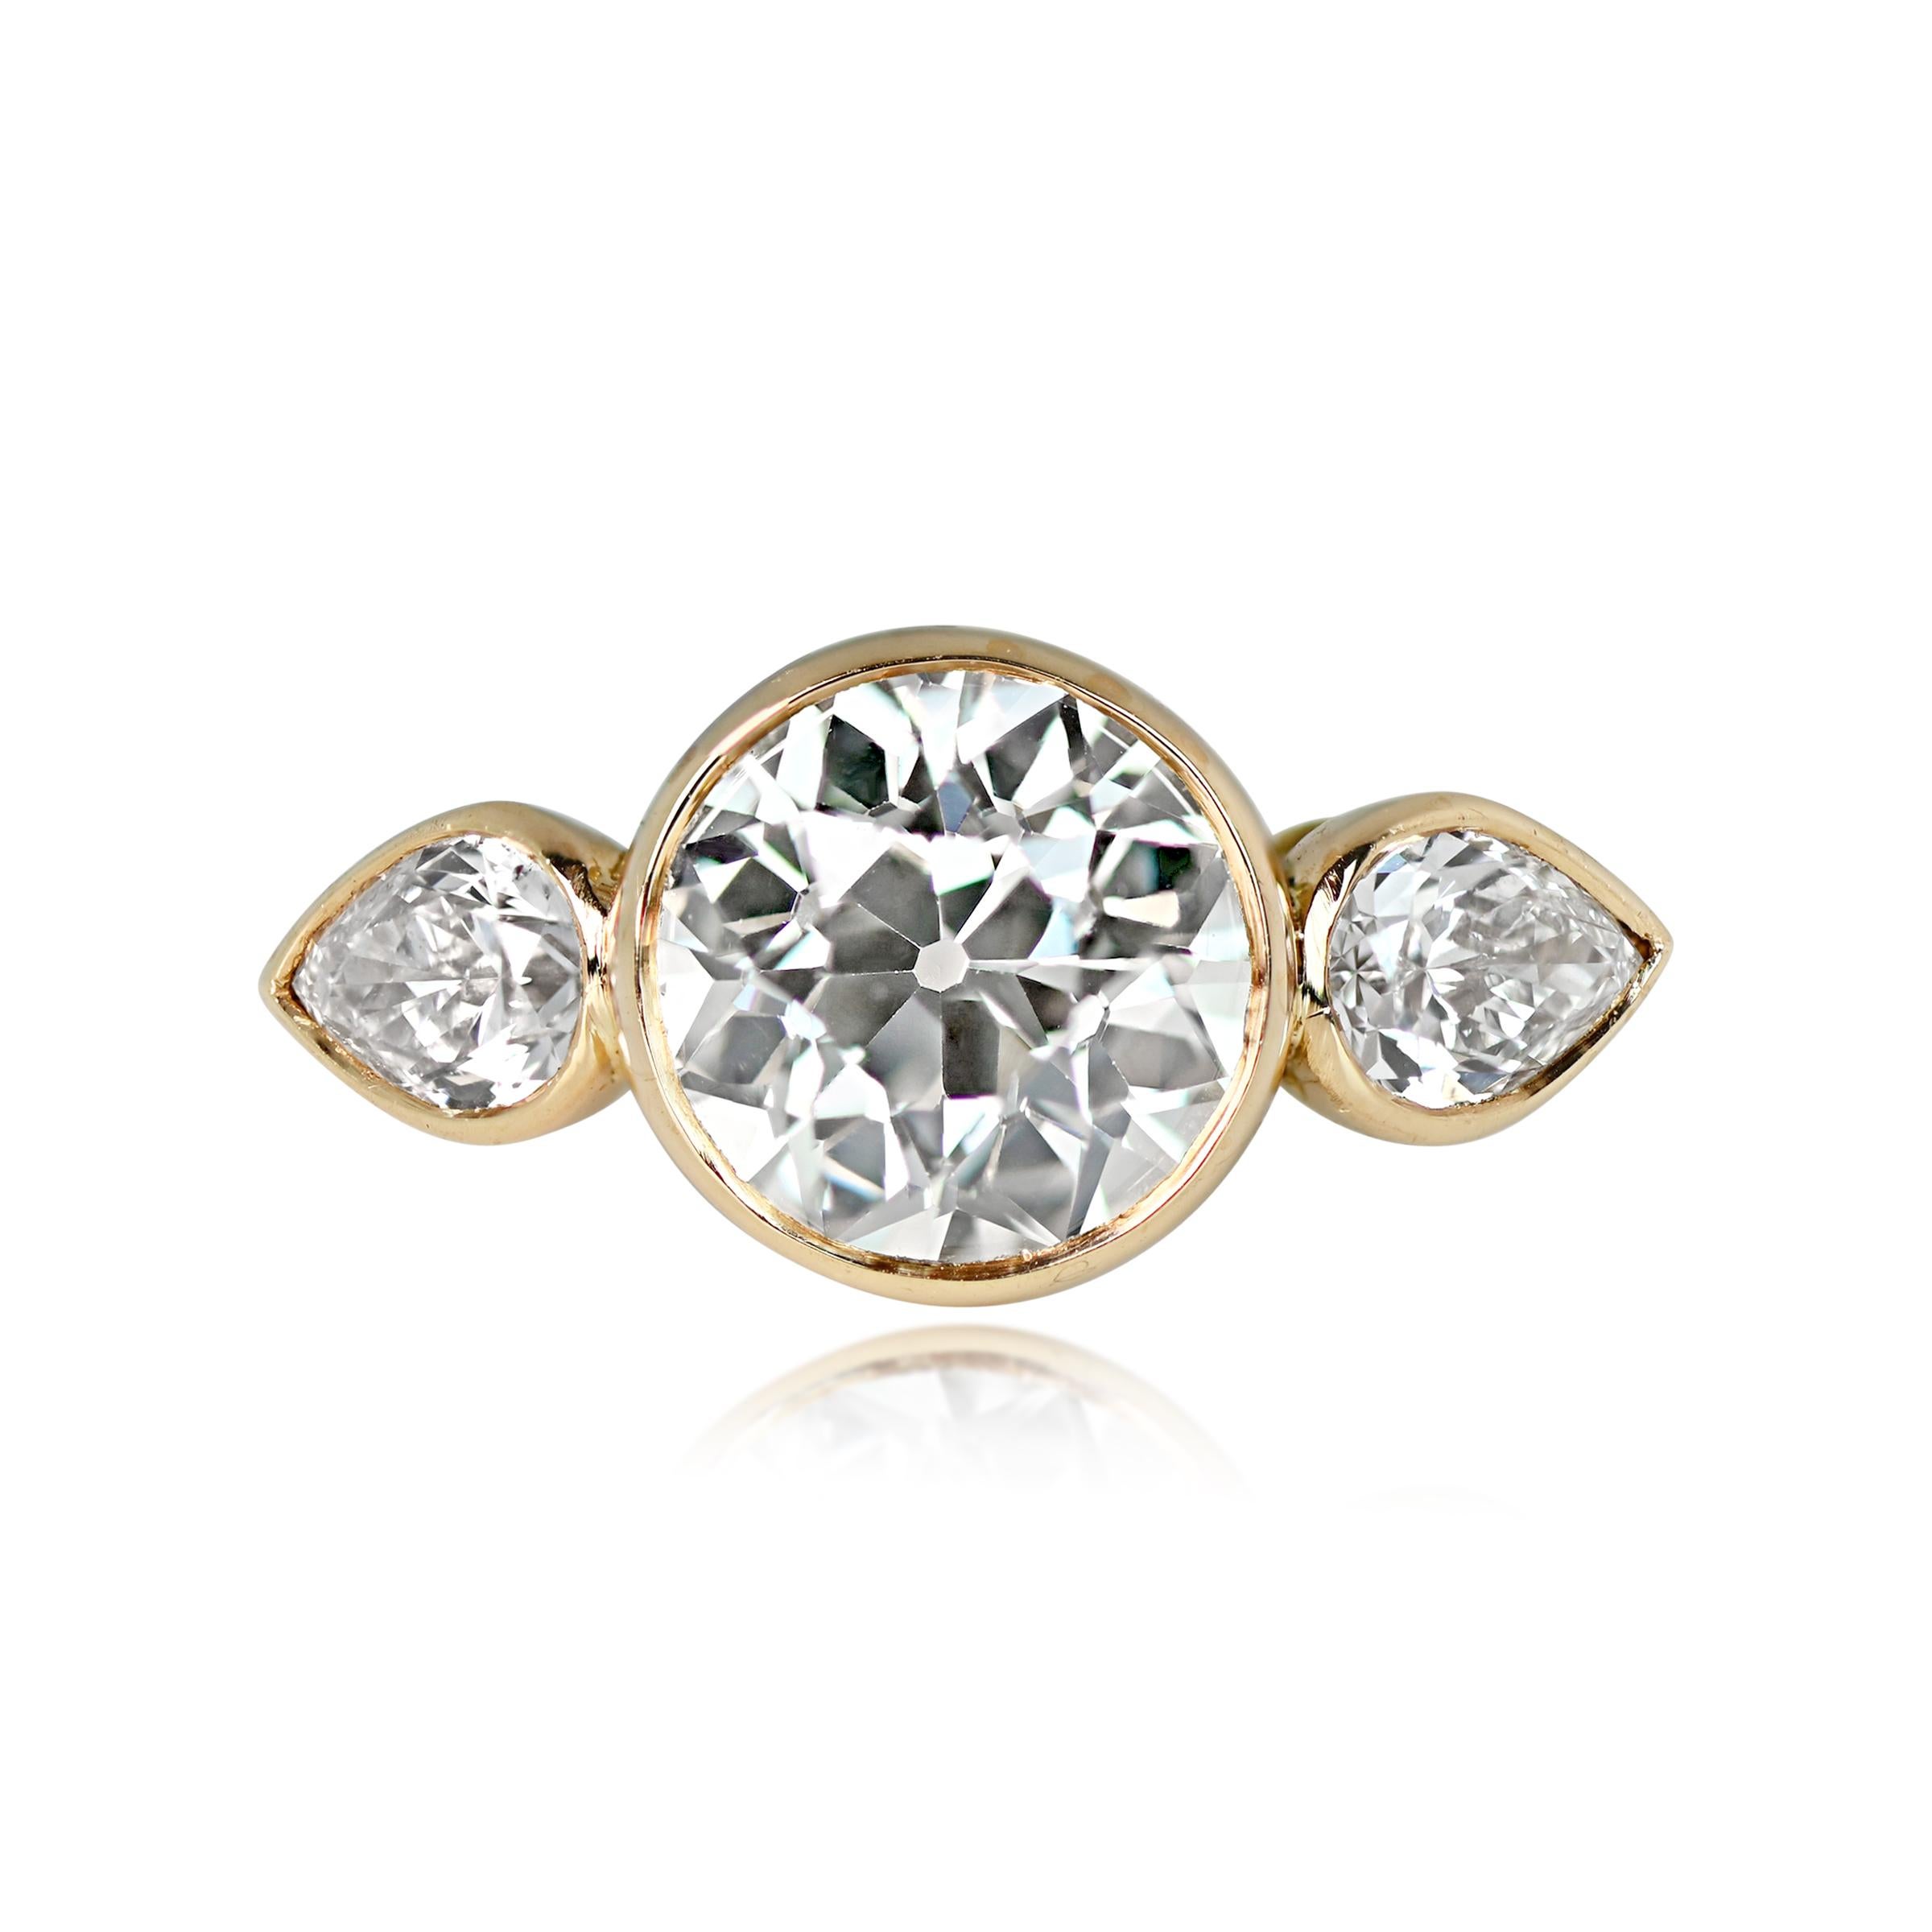 This elegant handmade diamond ring is set in 18k yellow gold, featuring a lively old European cut diamond bezel-set at the center, flanked by two pear-shape diamonds. The center diamond is a stunning 2.06 carats in J color and VS2 clarity, while the